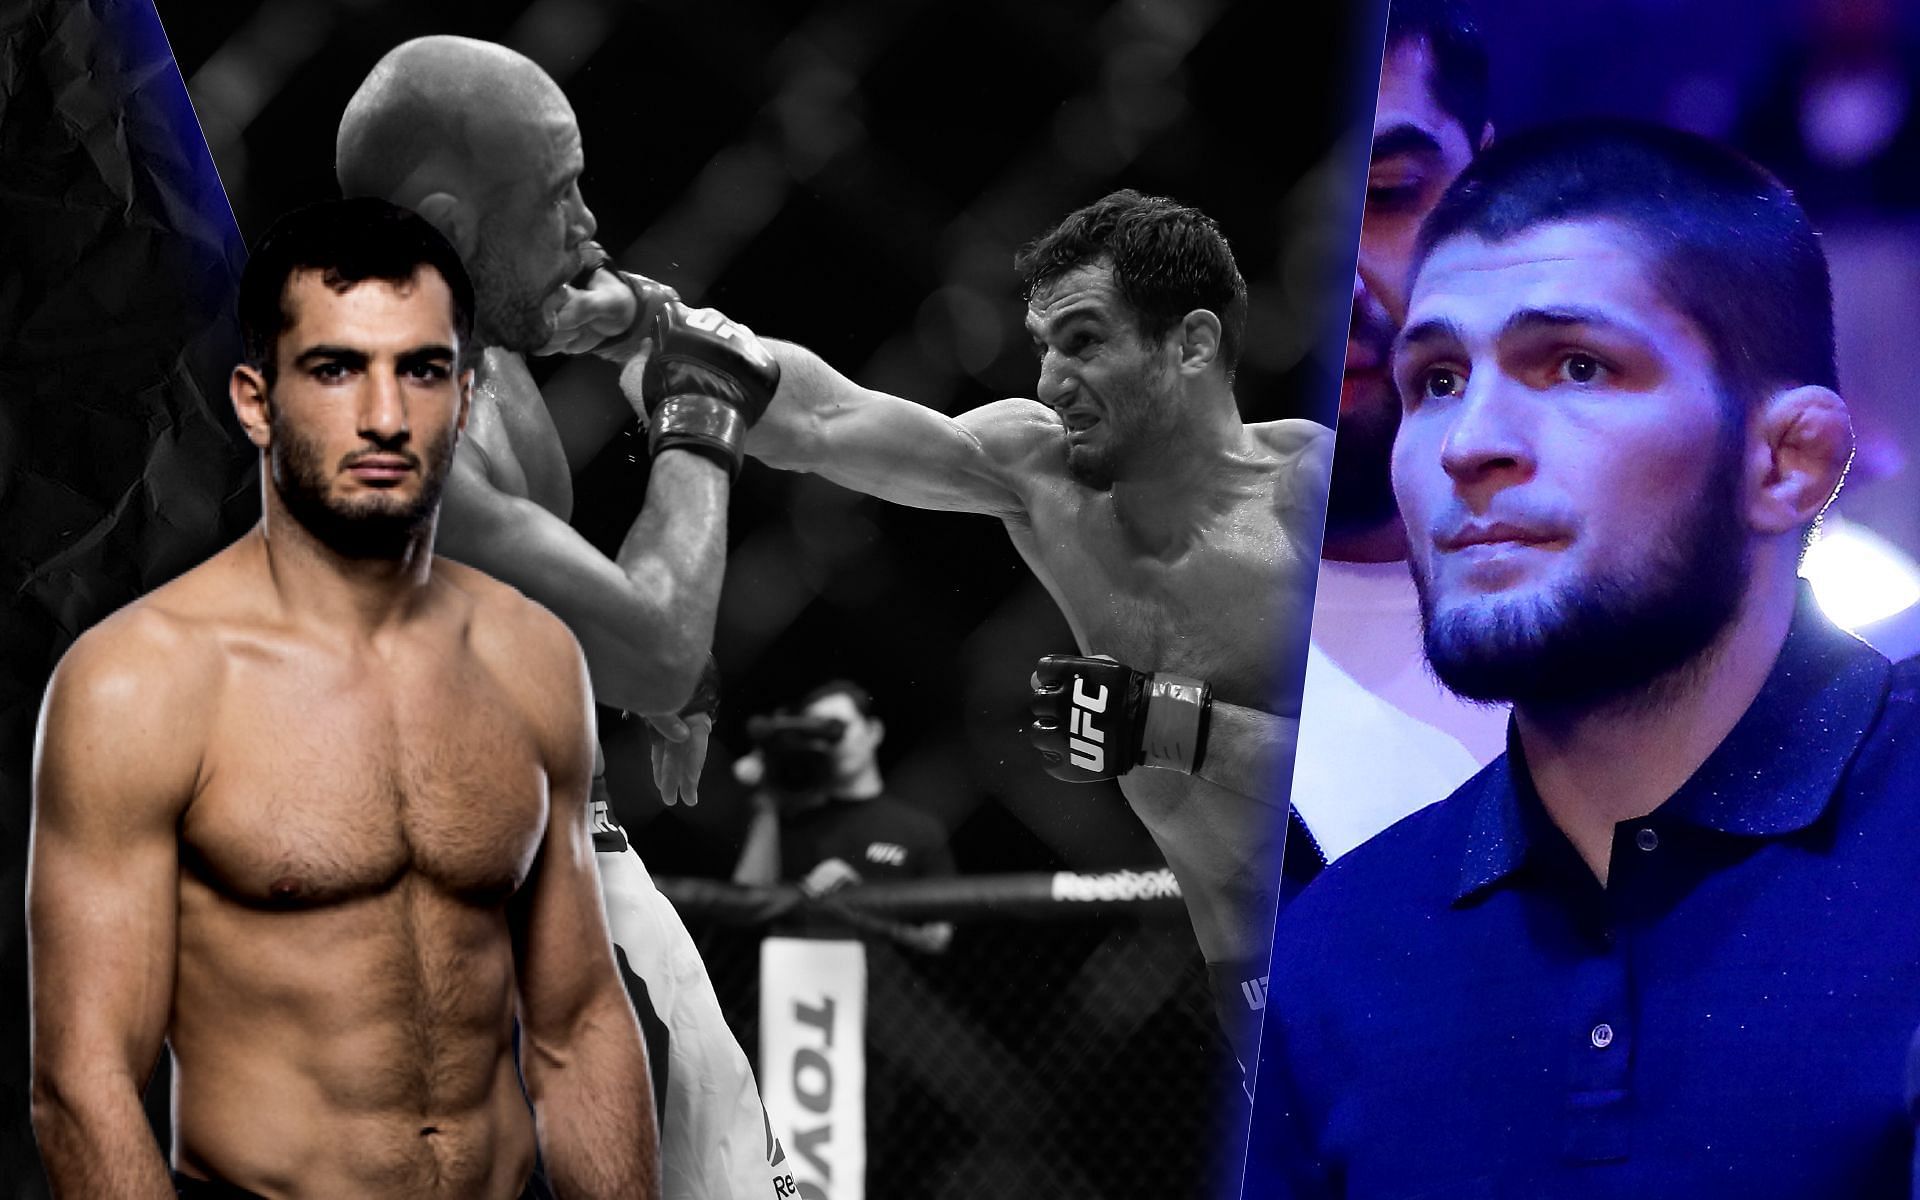 Gegard Mousasi reacts to Khabib Nurmagomedov calling him the “most underrated fighter in MMA”